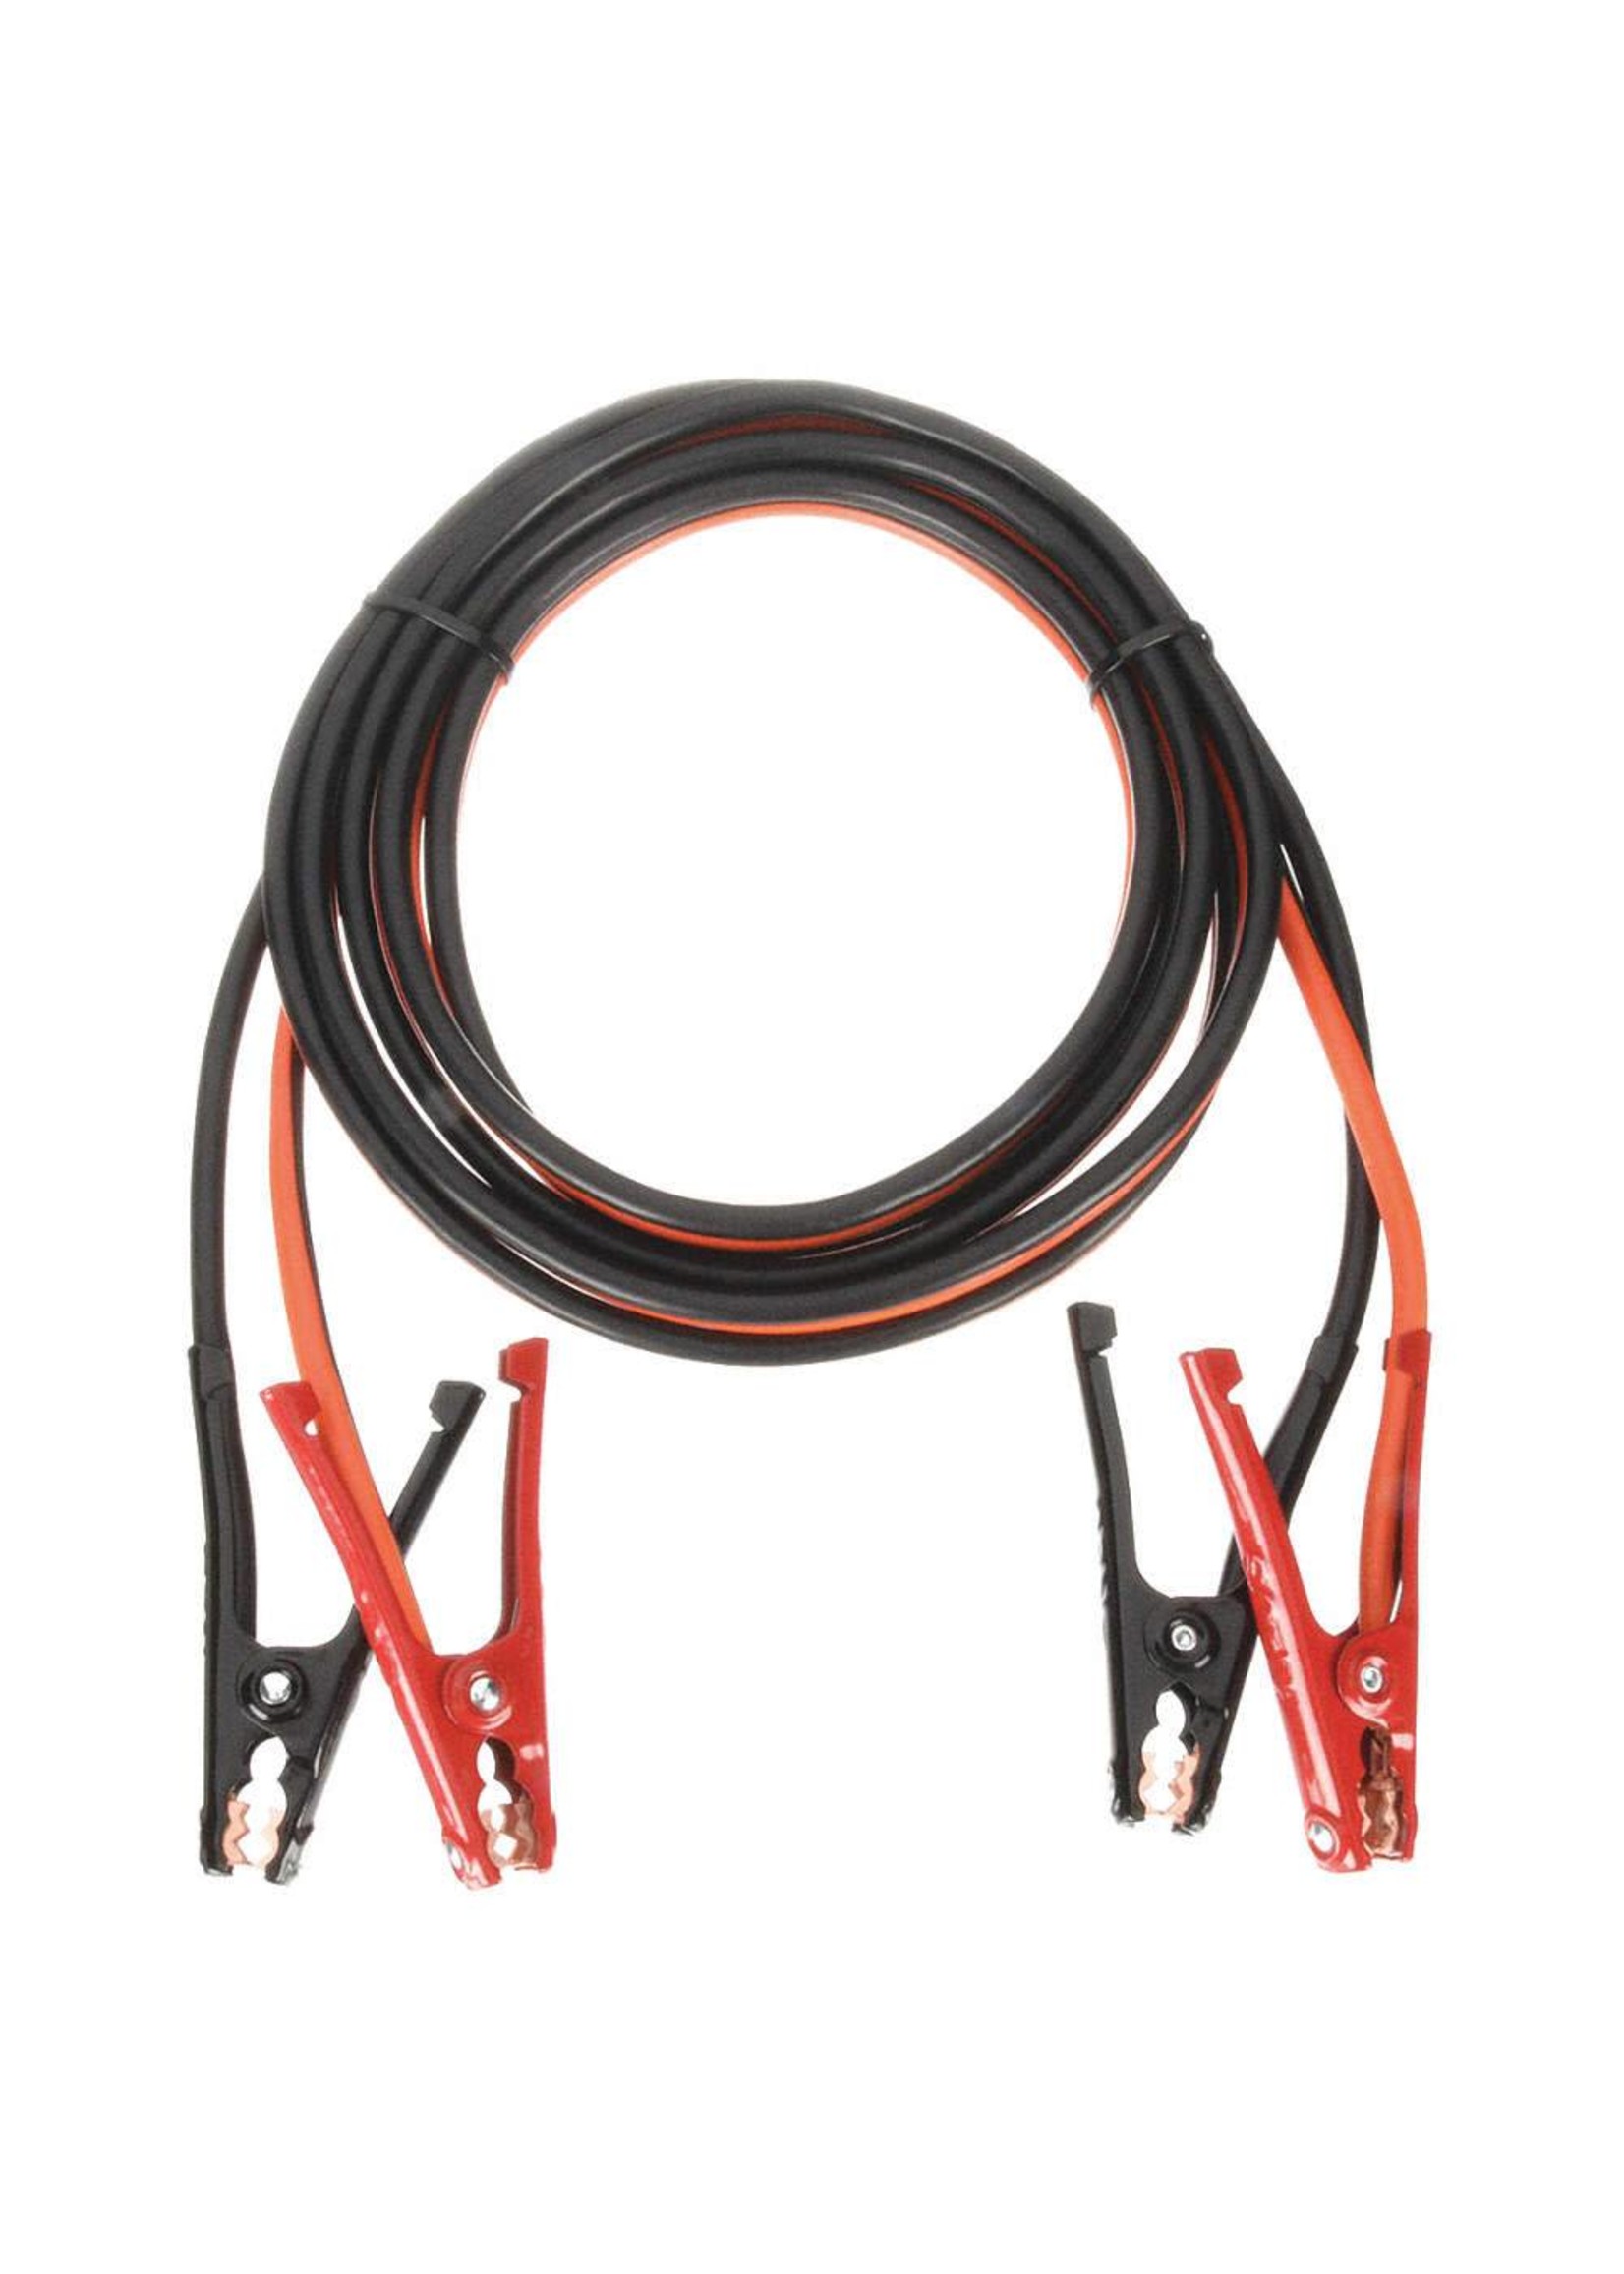 Battery Jumper Cables - 16 ft